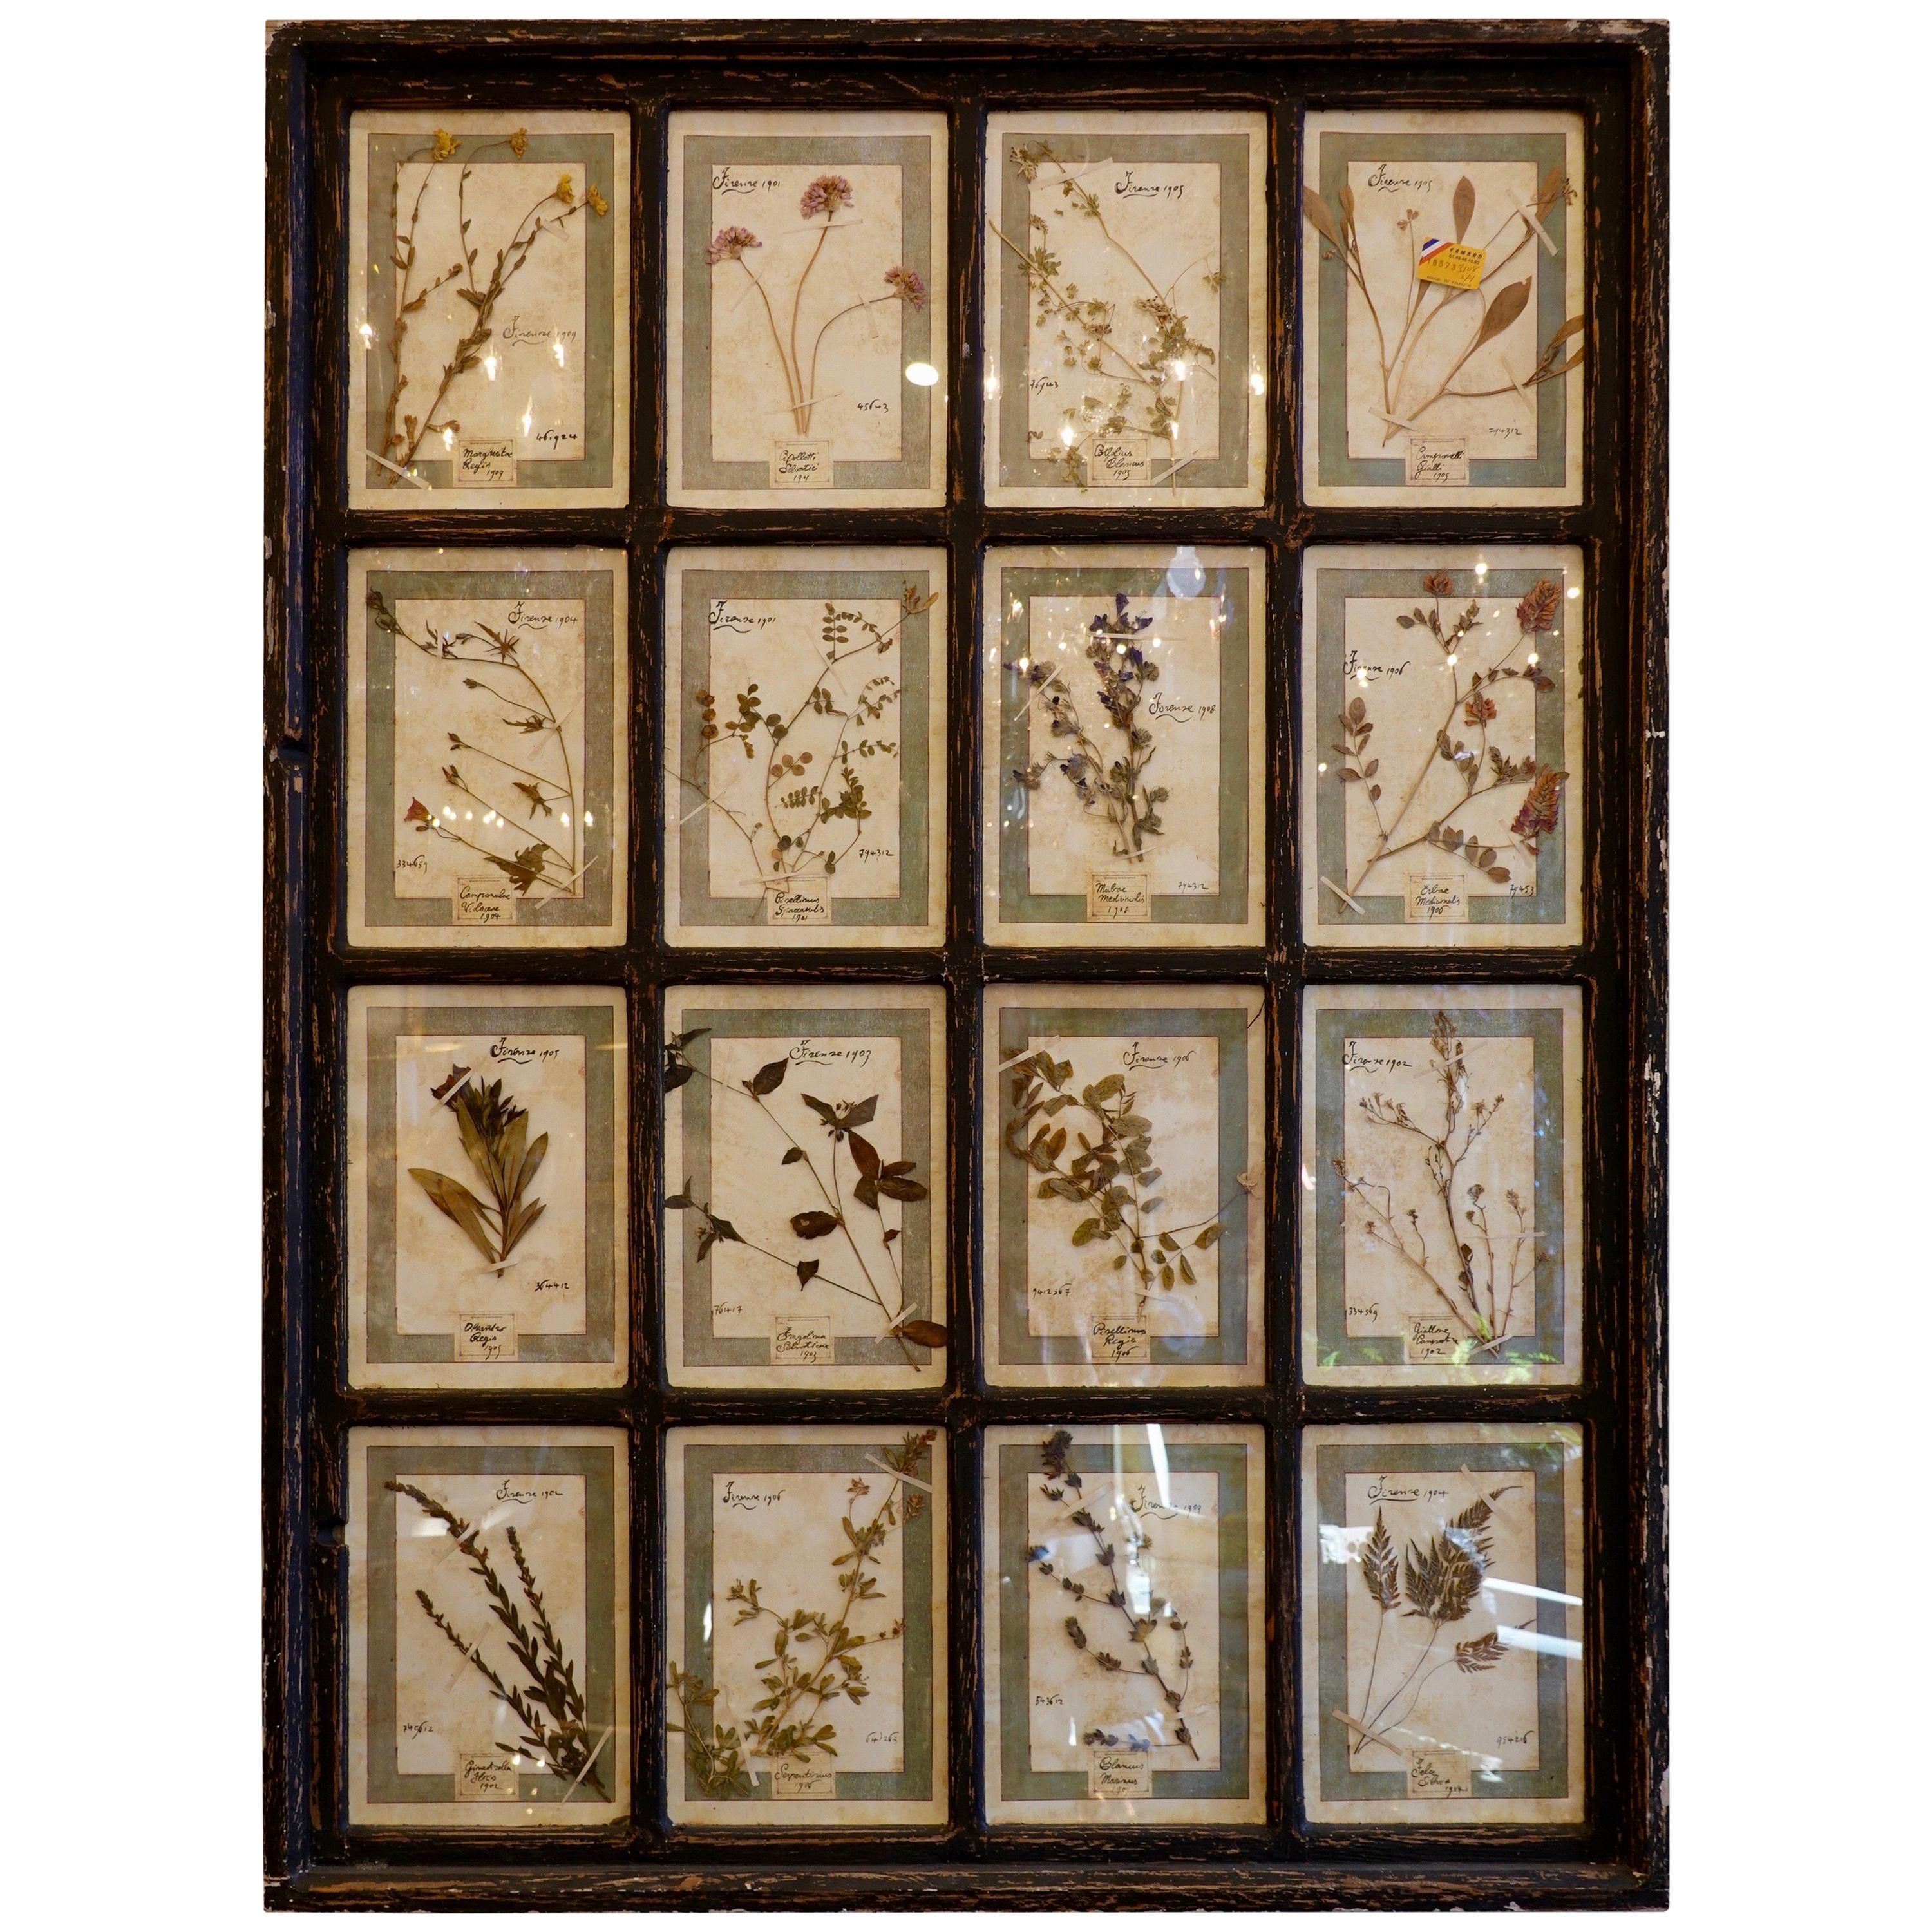 Collection of 16 Italian Herbiers Set in Large Paned Window Frame